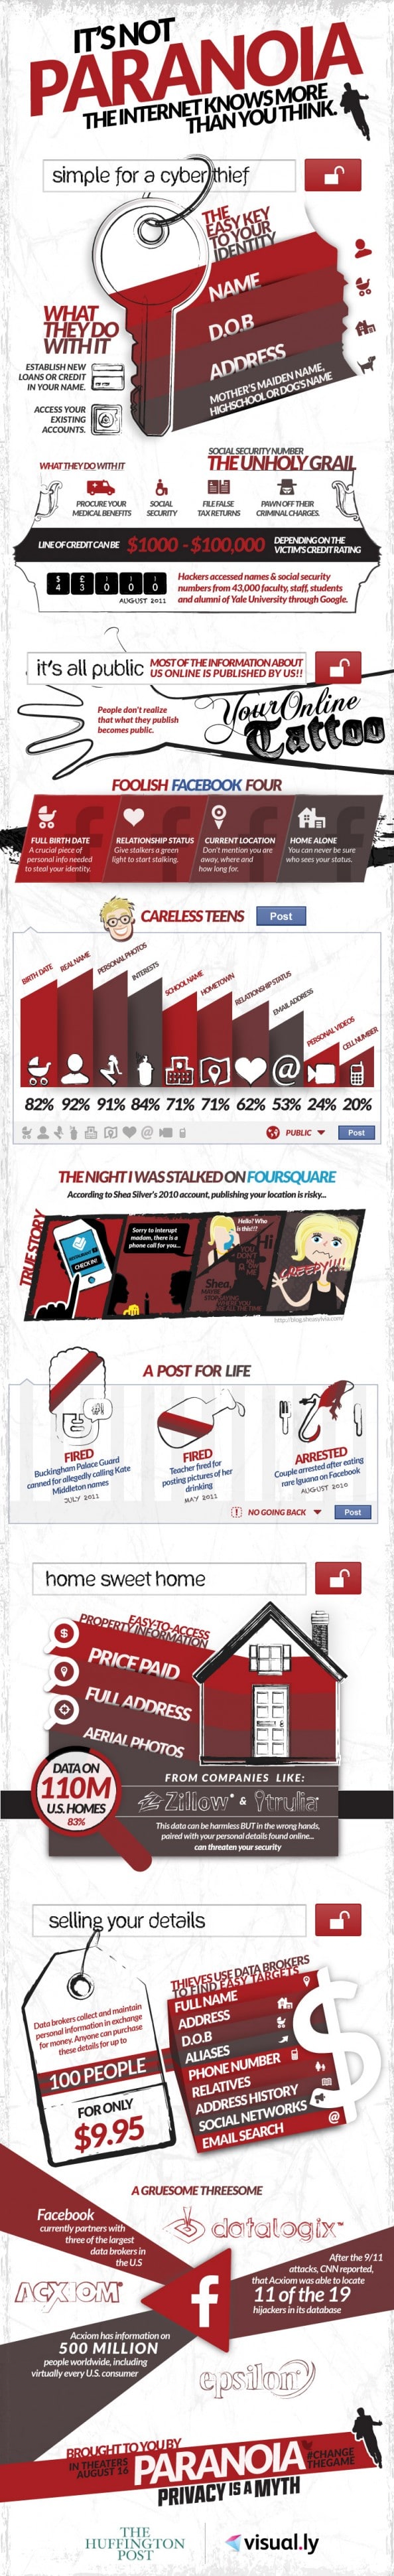 privacy-paranoia-or-truth-infographic